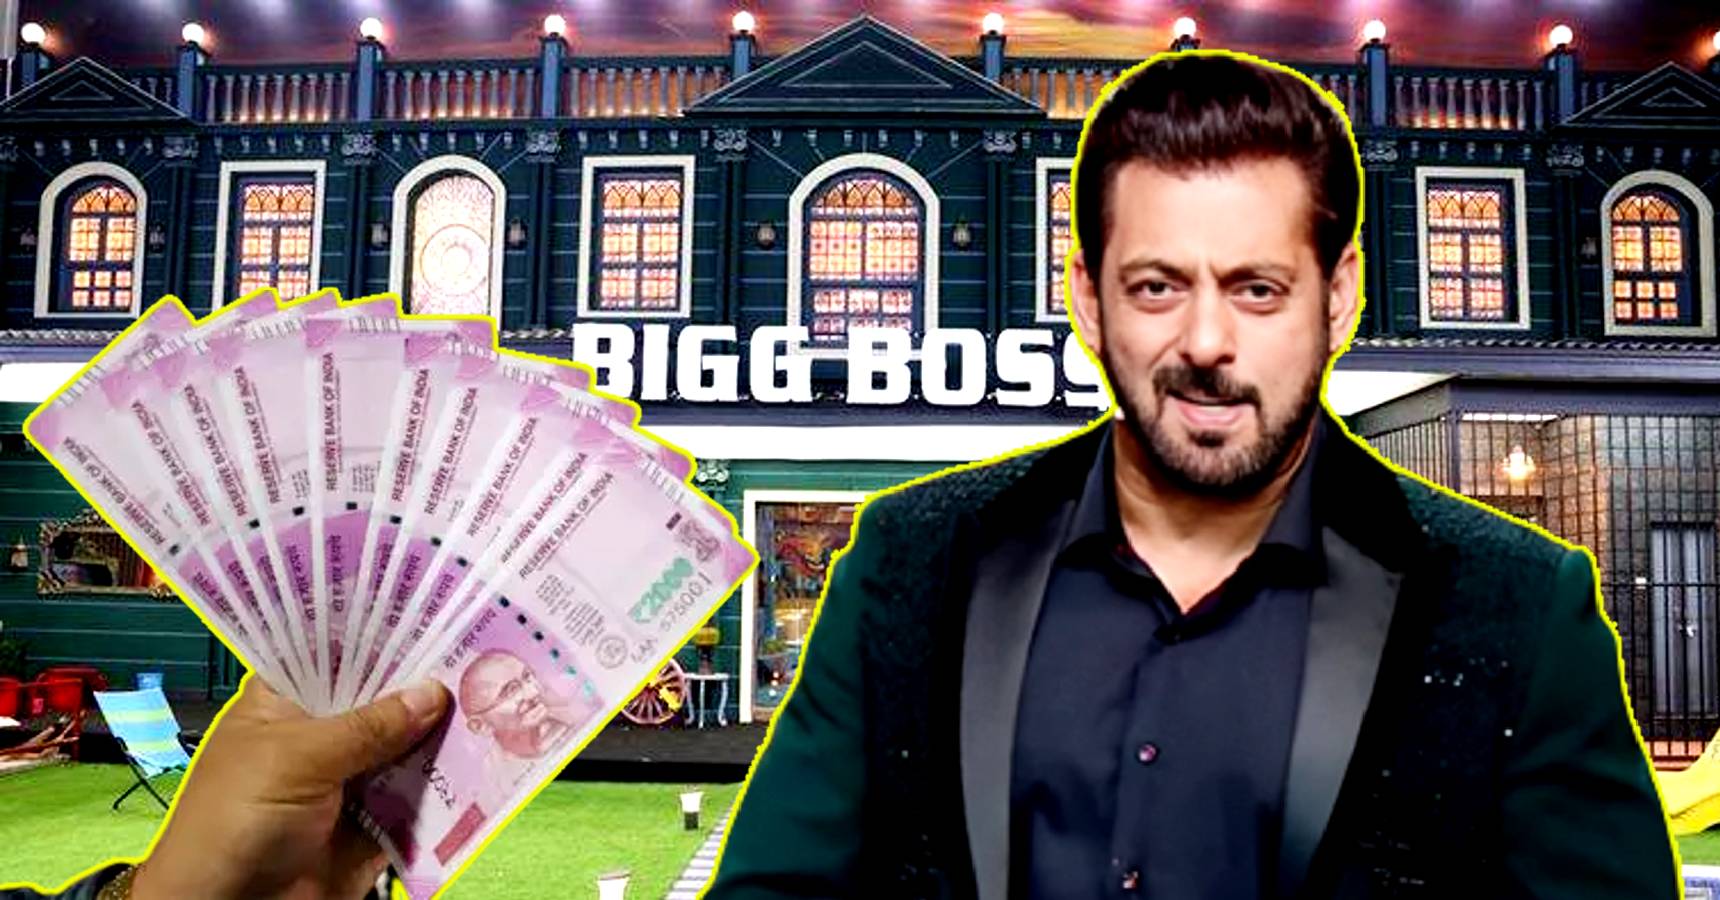 Bollywood actor Salman Khan fees for famous reality show Bigg Boss